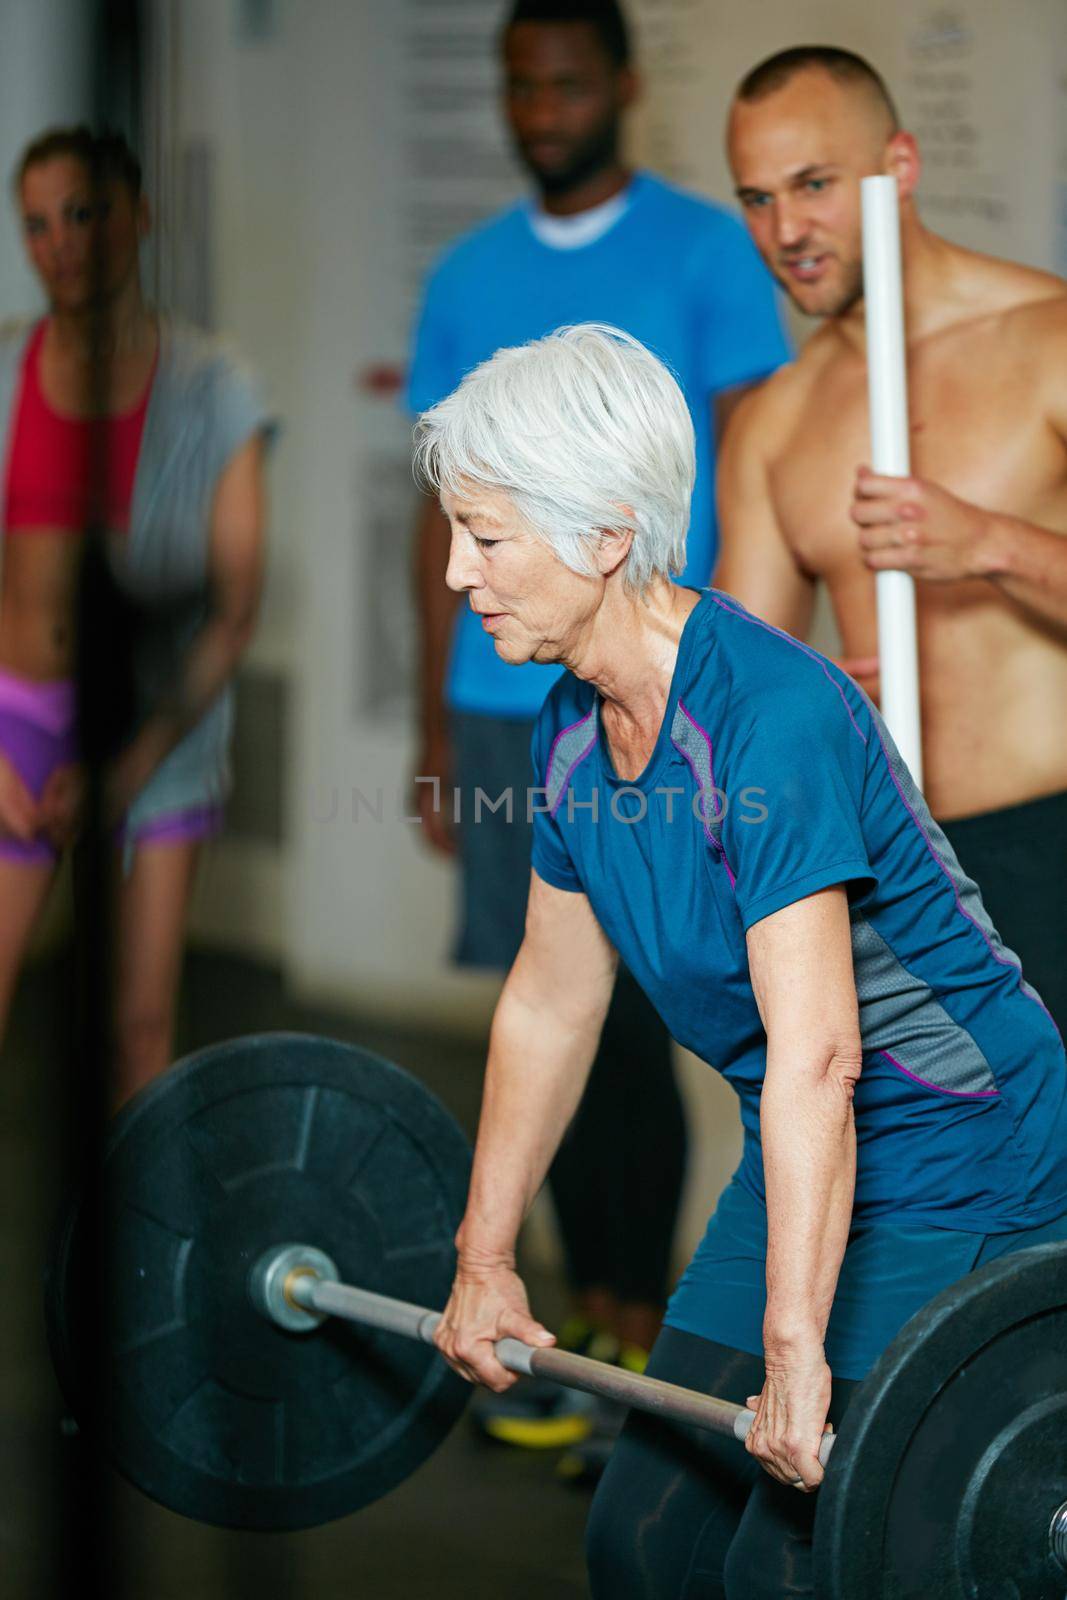 Shot of a senior woman lifting weights while a group of people in the background watch on.